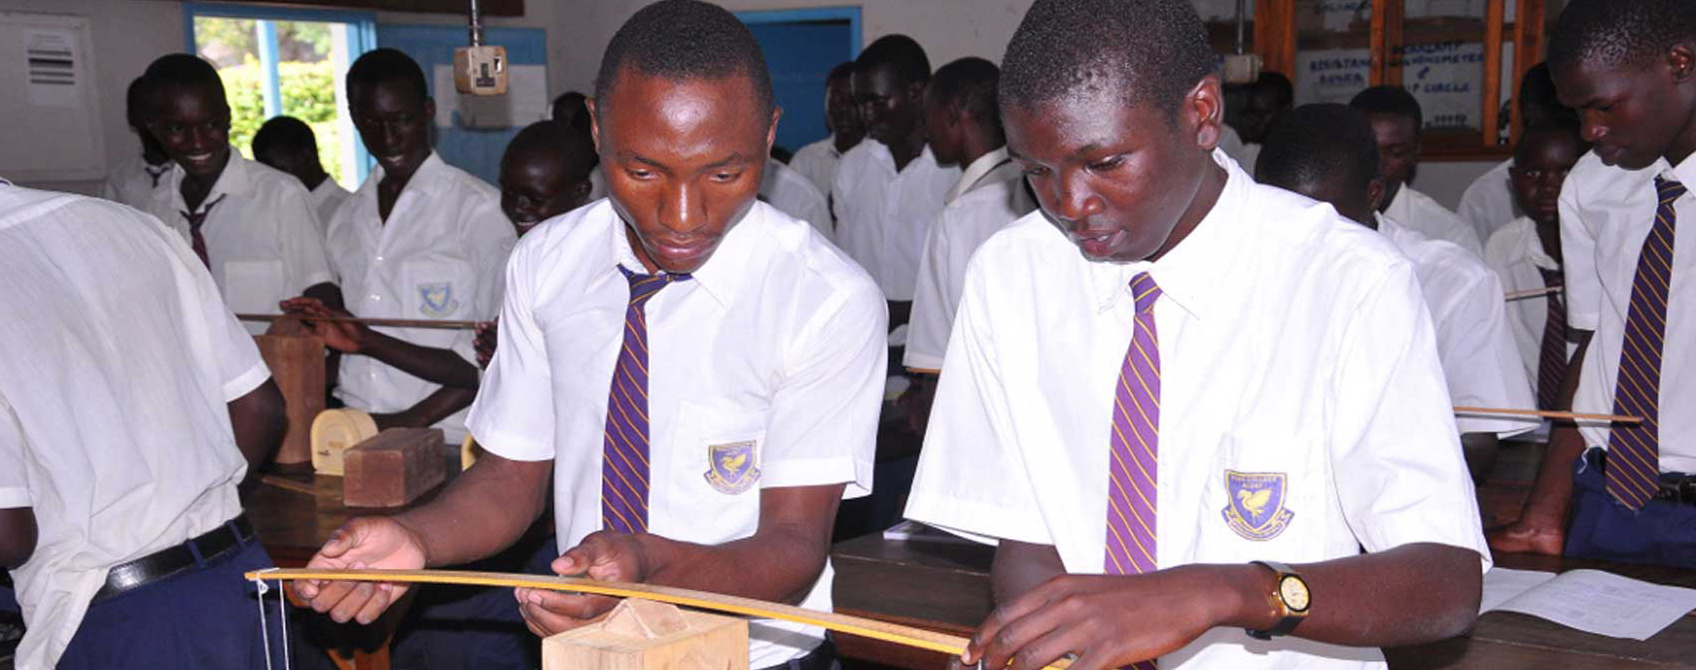 UGANDA ADVANCED CERTIFICATE OF EDUCATION PHYSICS PAST PAPERS PAPER 1 4